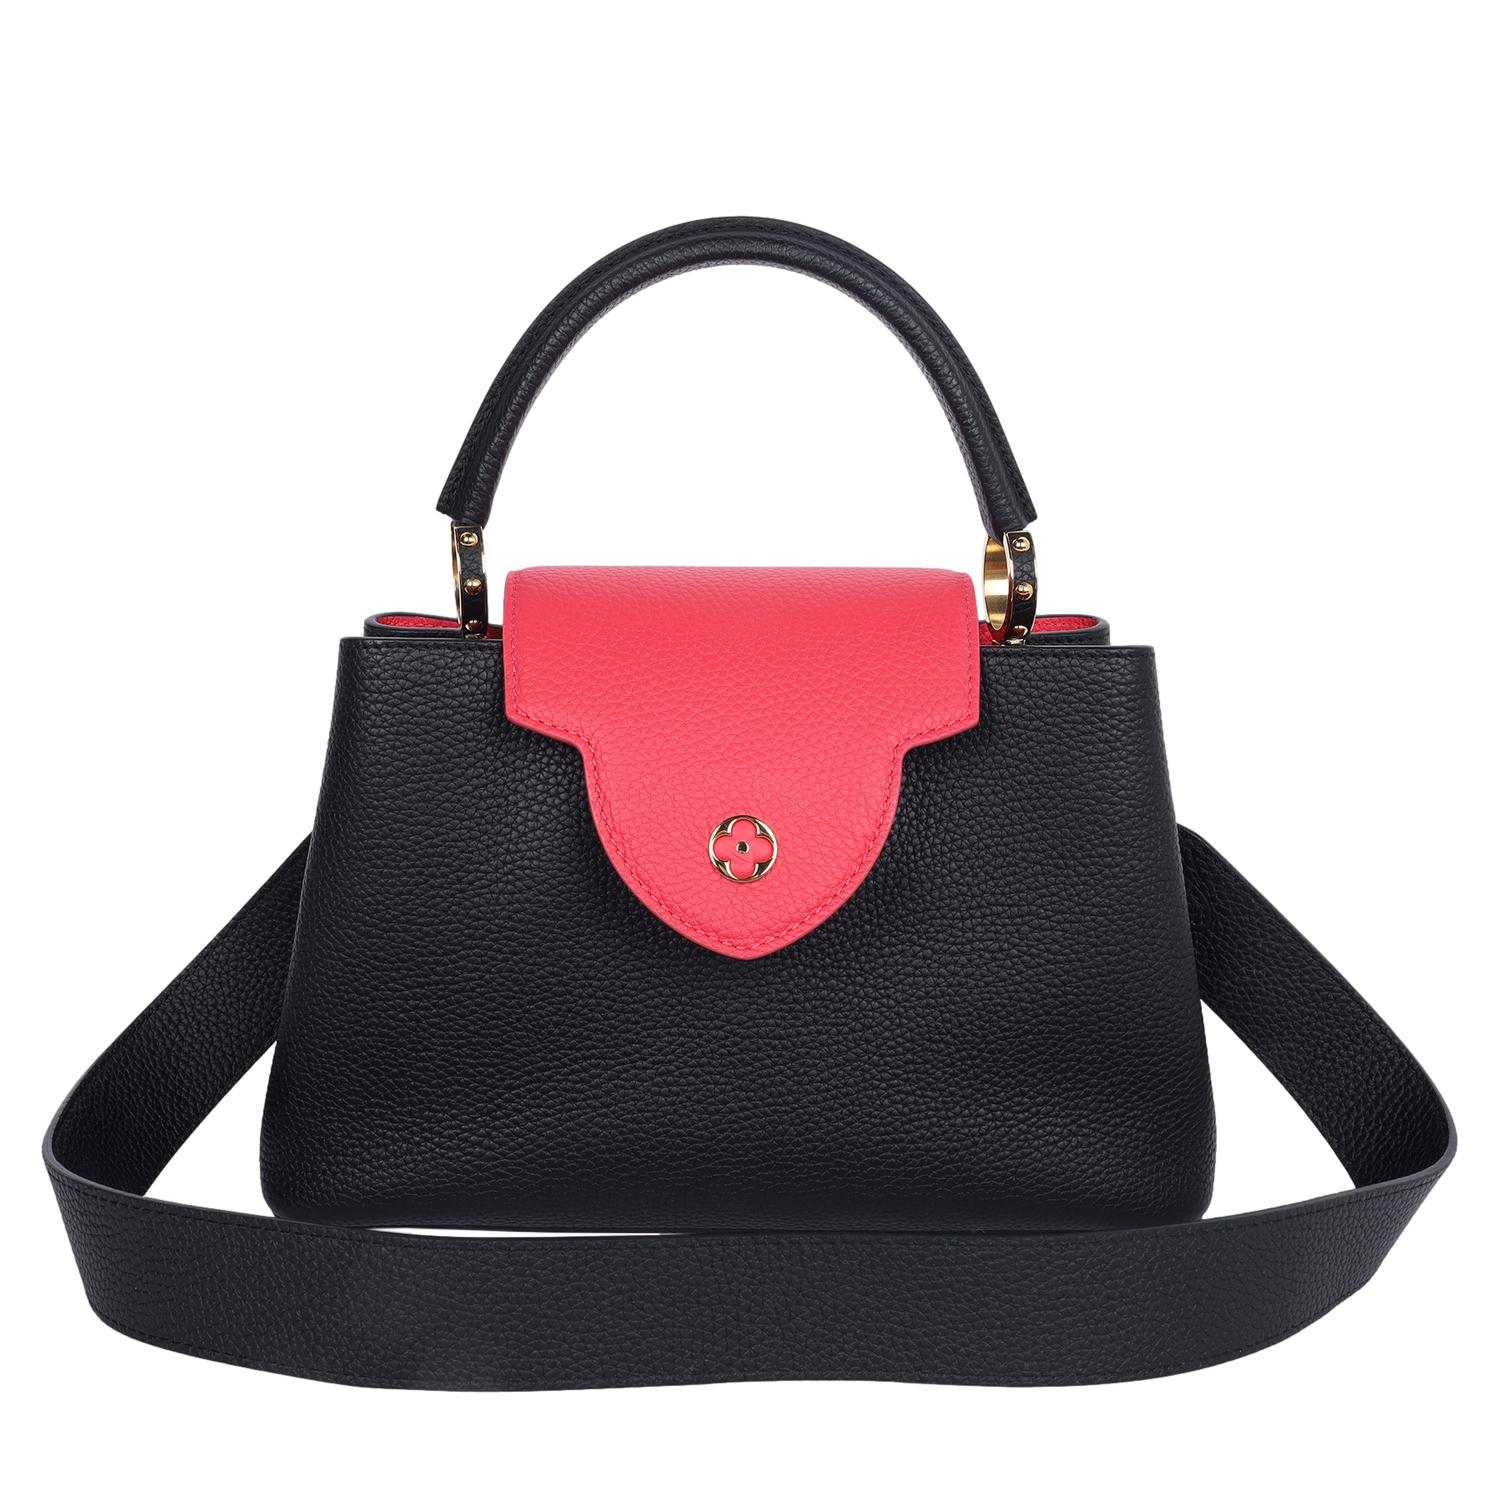 Authentic, pre-loved Louis Vuitton Special Edition Capucines MM handbag in black and Rose Berlingot.  Features full-grain Taurillon leather skin, the bag’s two-way flap and leather-wrapped LV signature are in a beautiful fashionable contrasting hue.